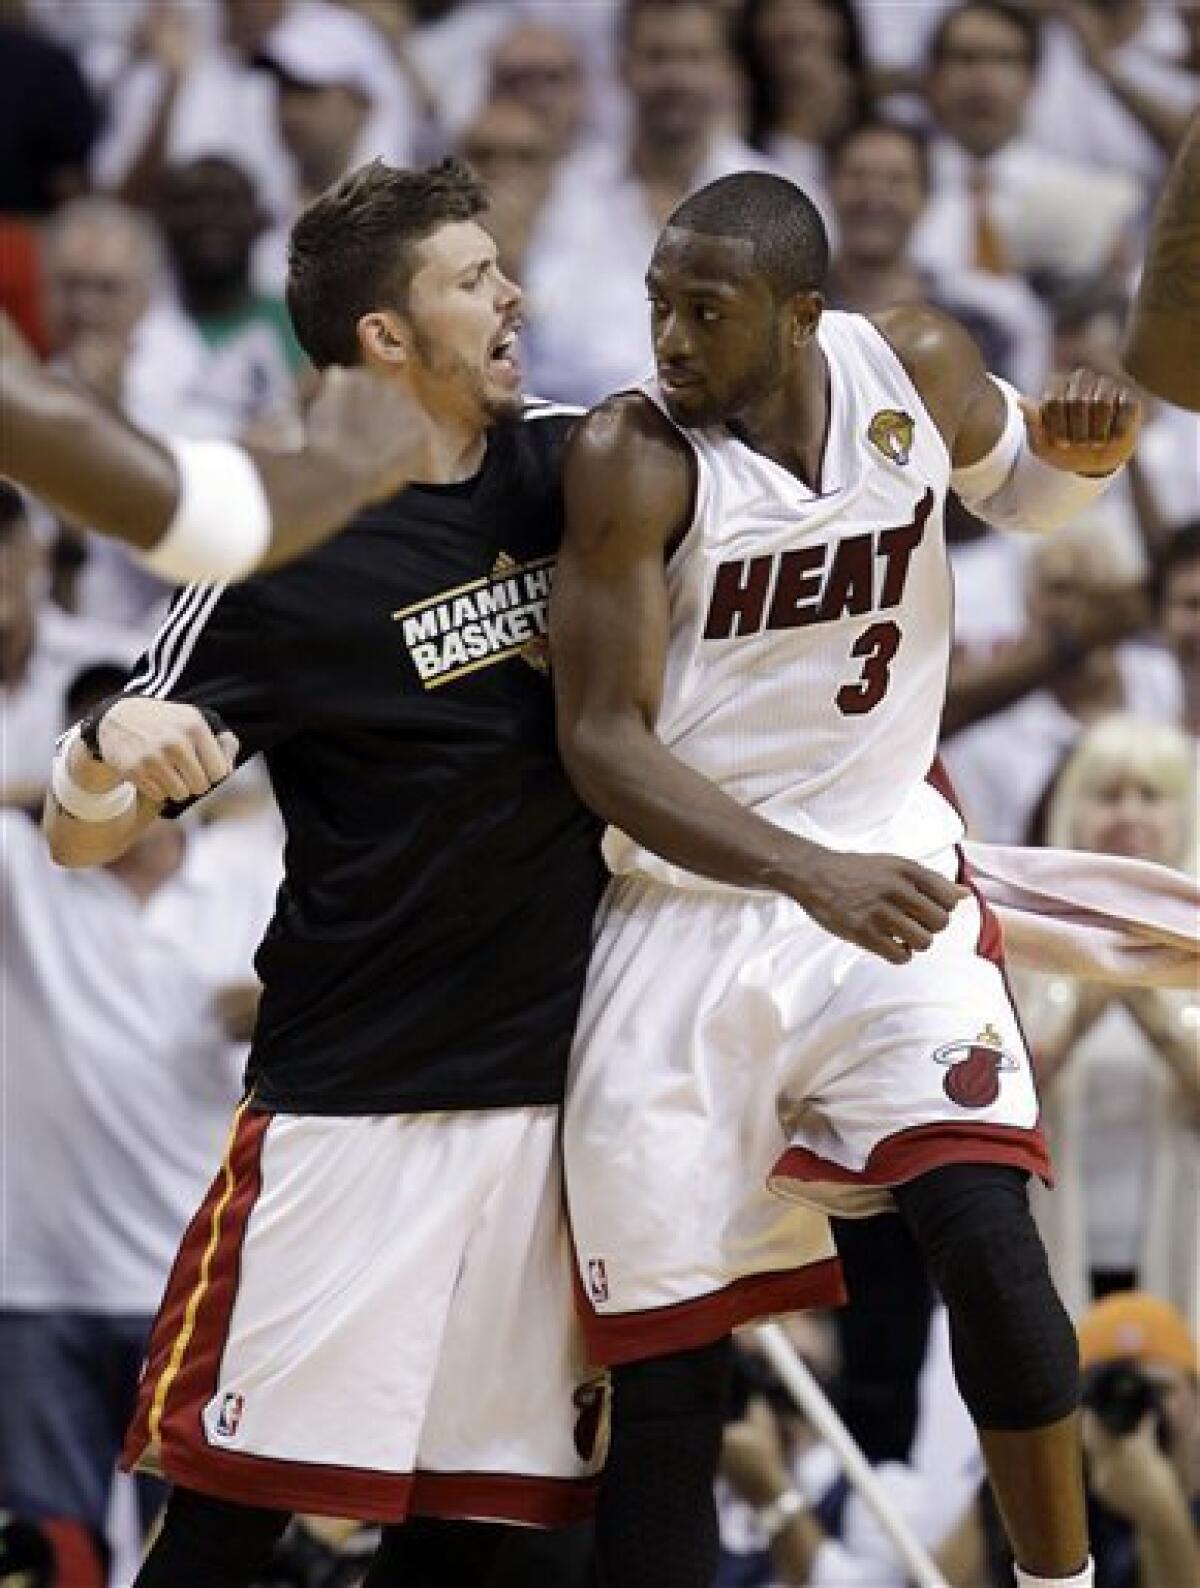 LeBron James & the NBA Finals: What was behind the Mavs' win over the Heat?  Poll 